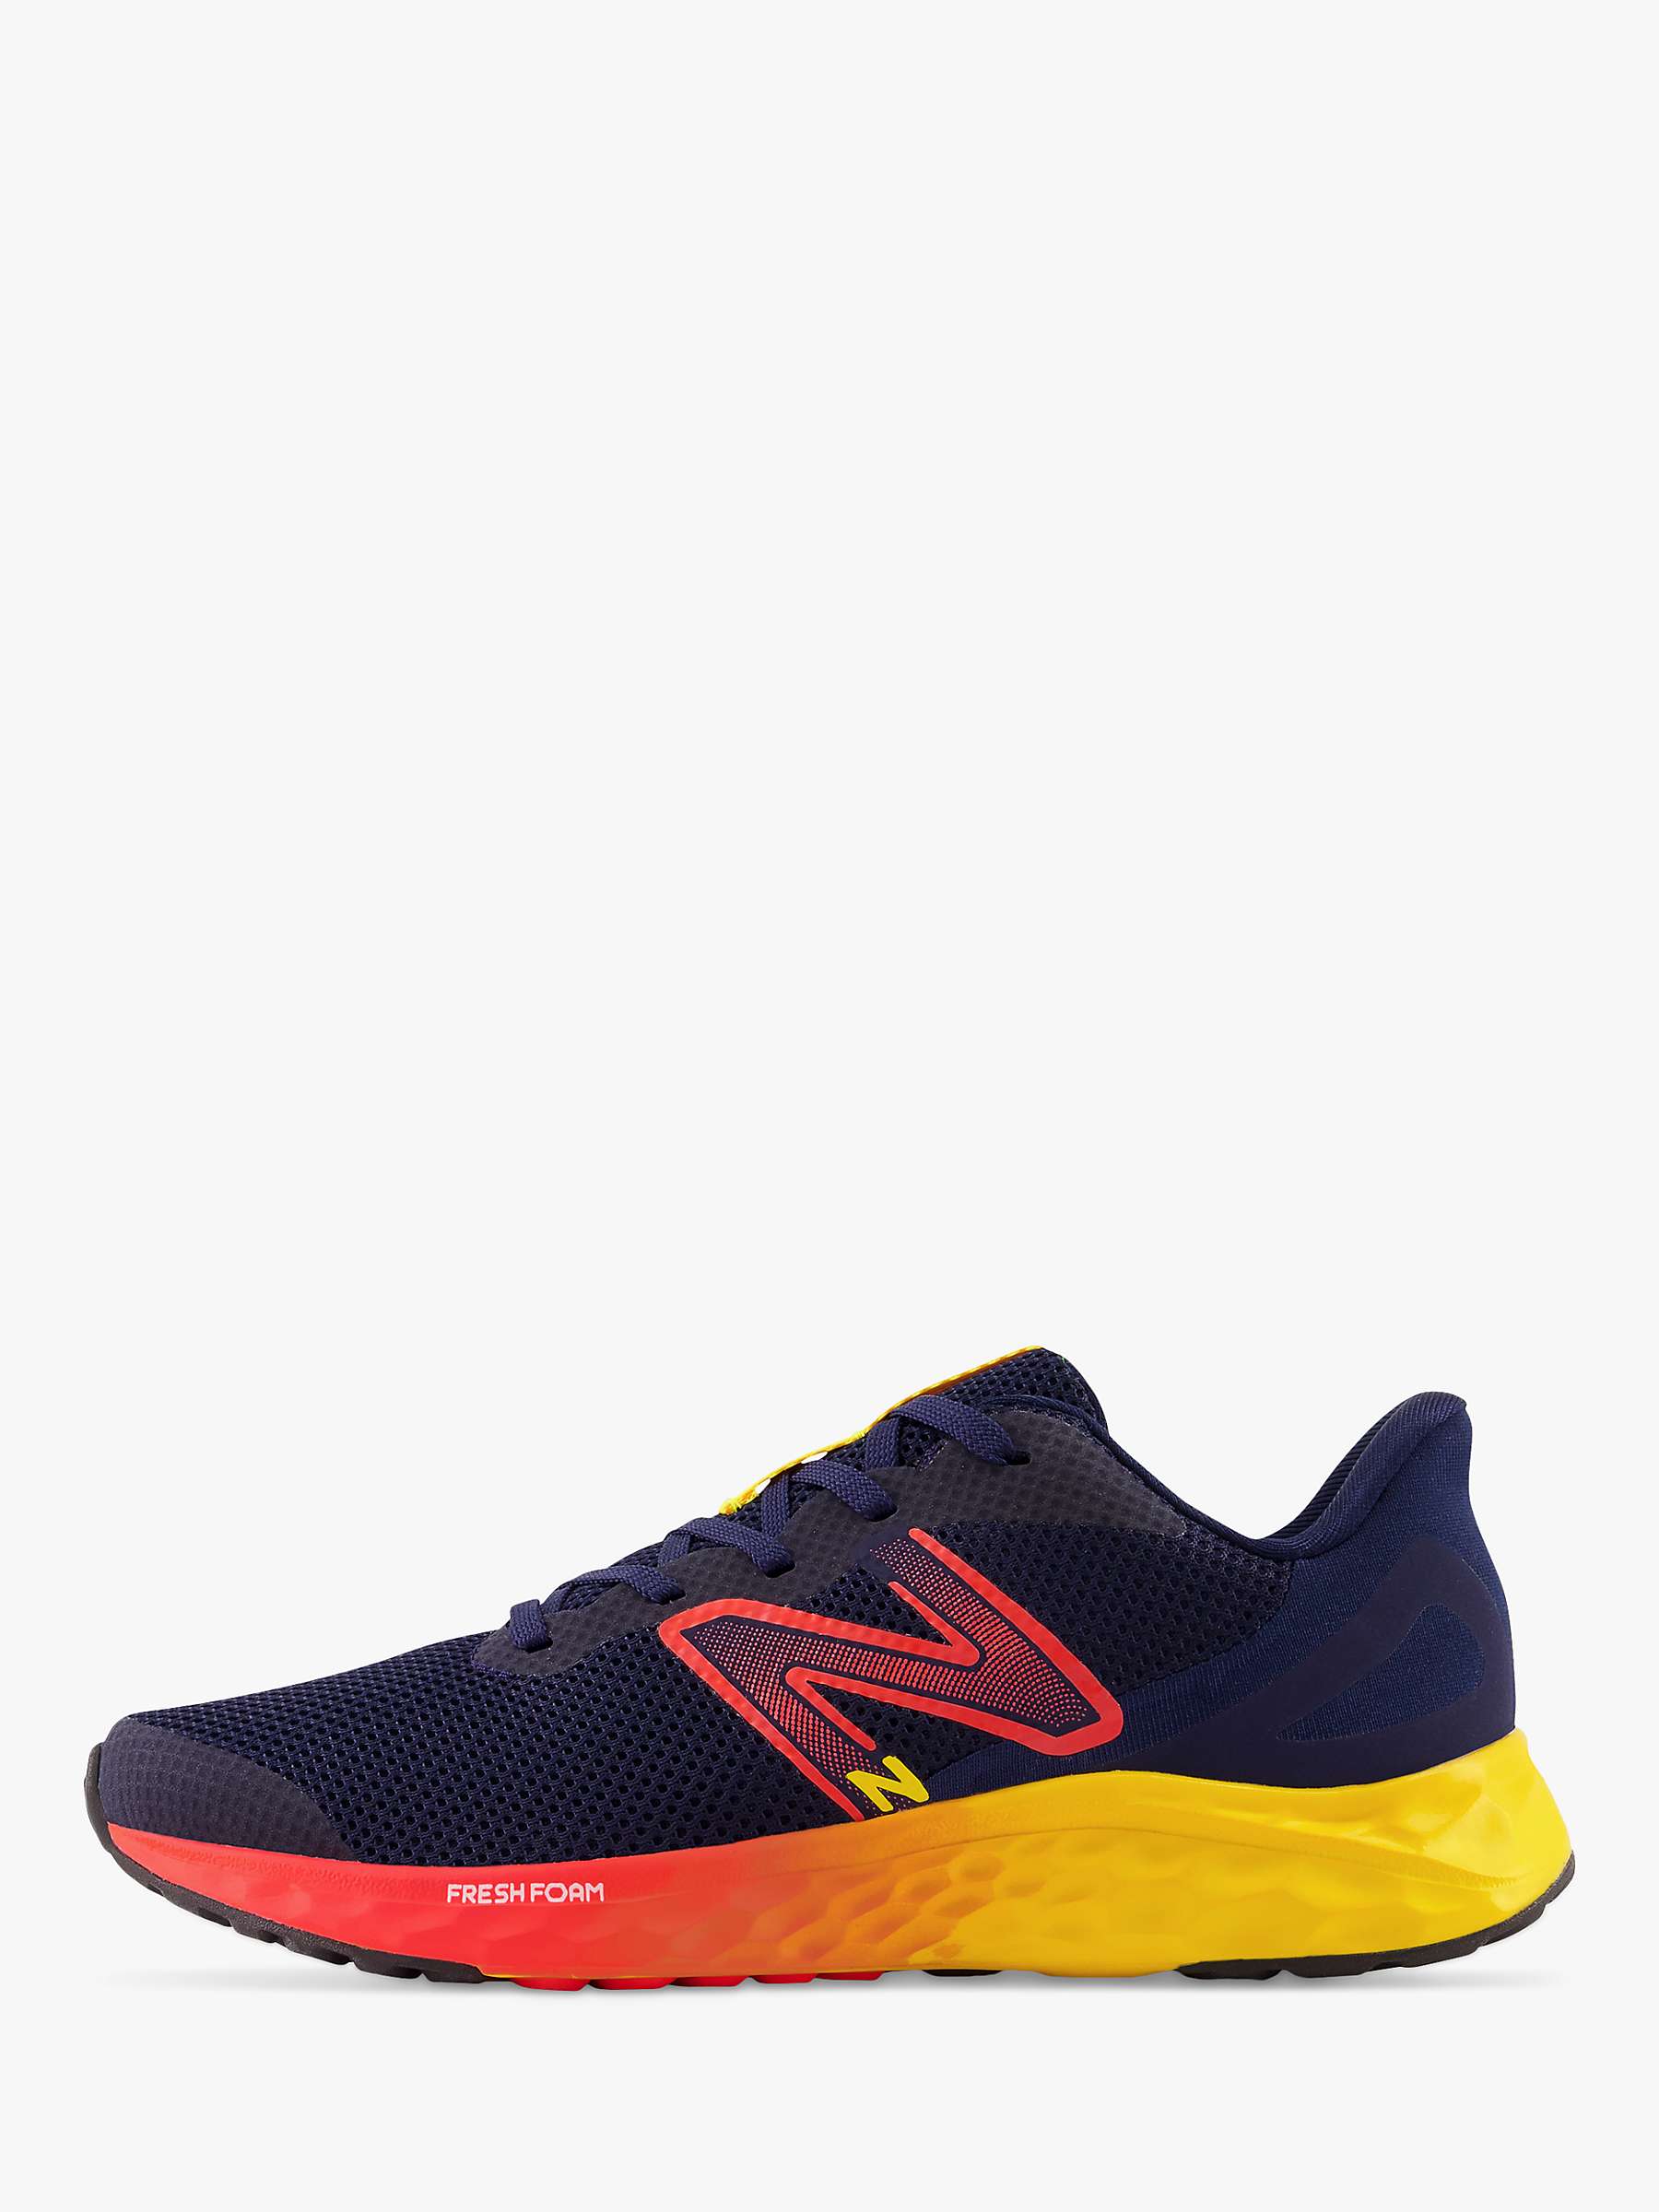 Buy New Balance Kids' Arishi v4 Multi Sole Lace-Up Running Trainers Online at johnlewis.com